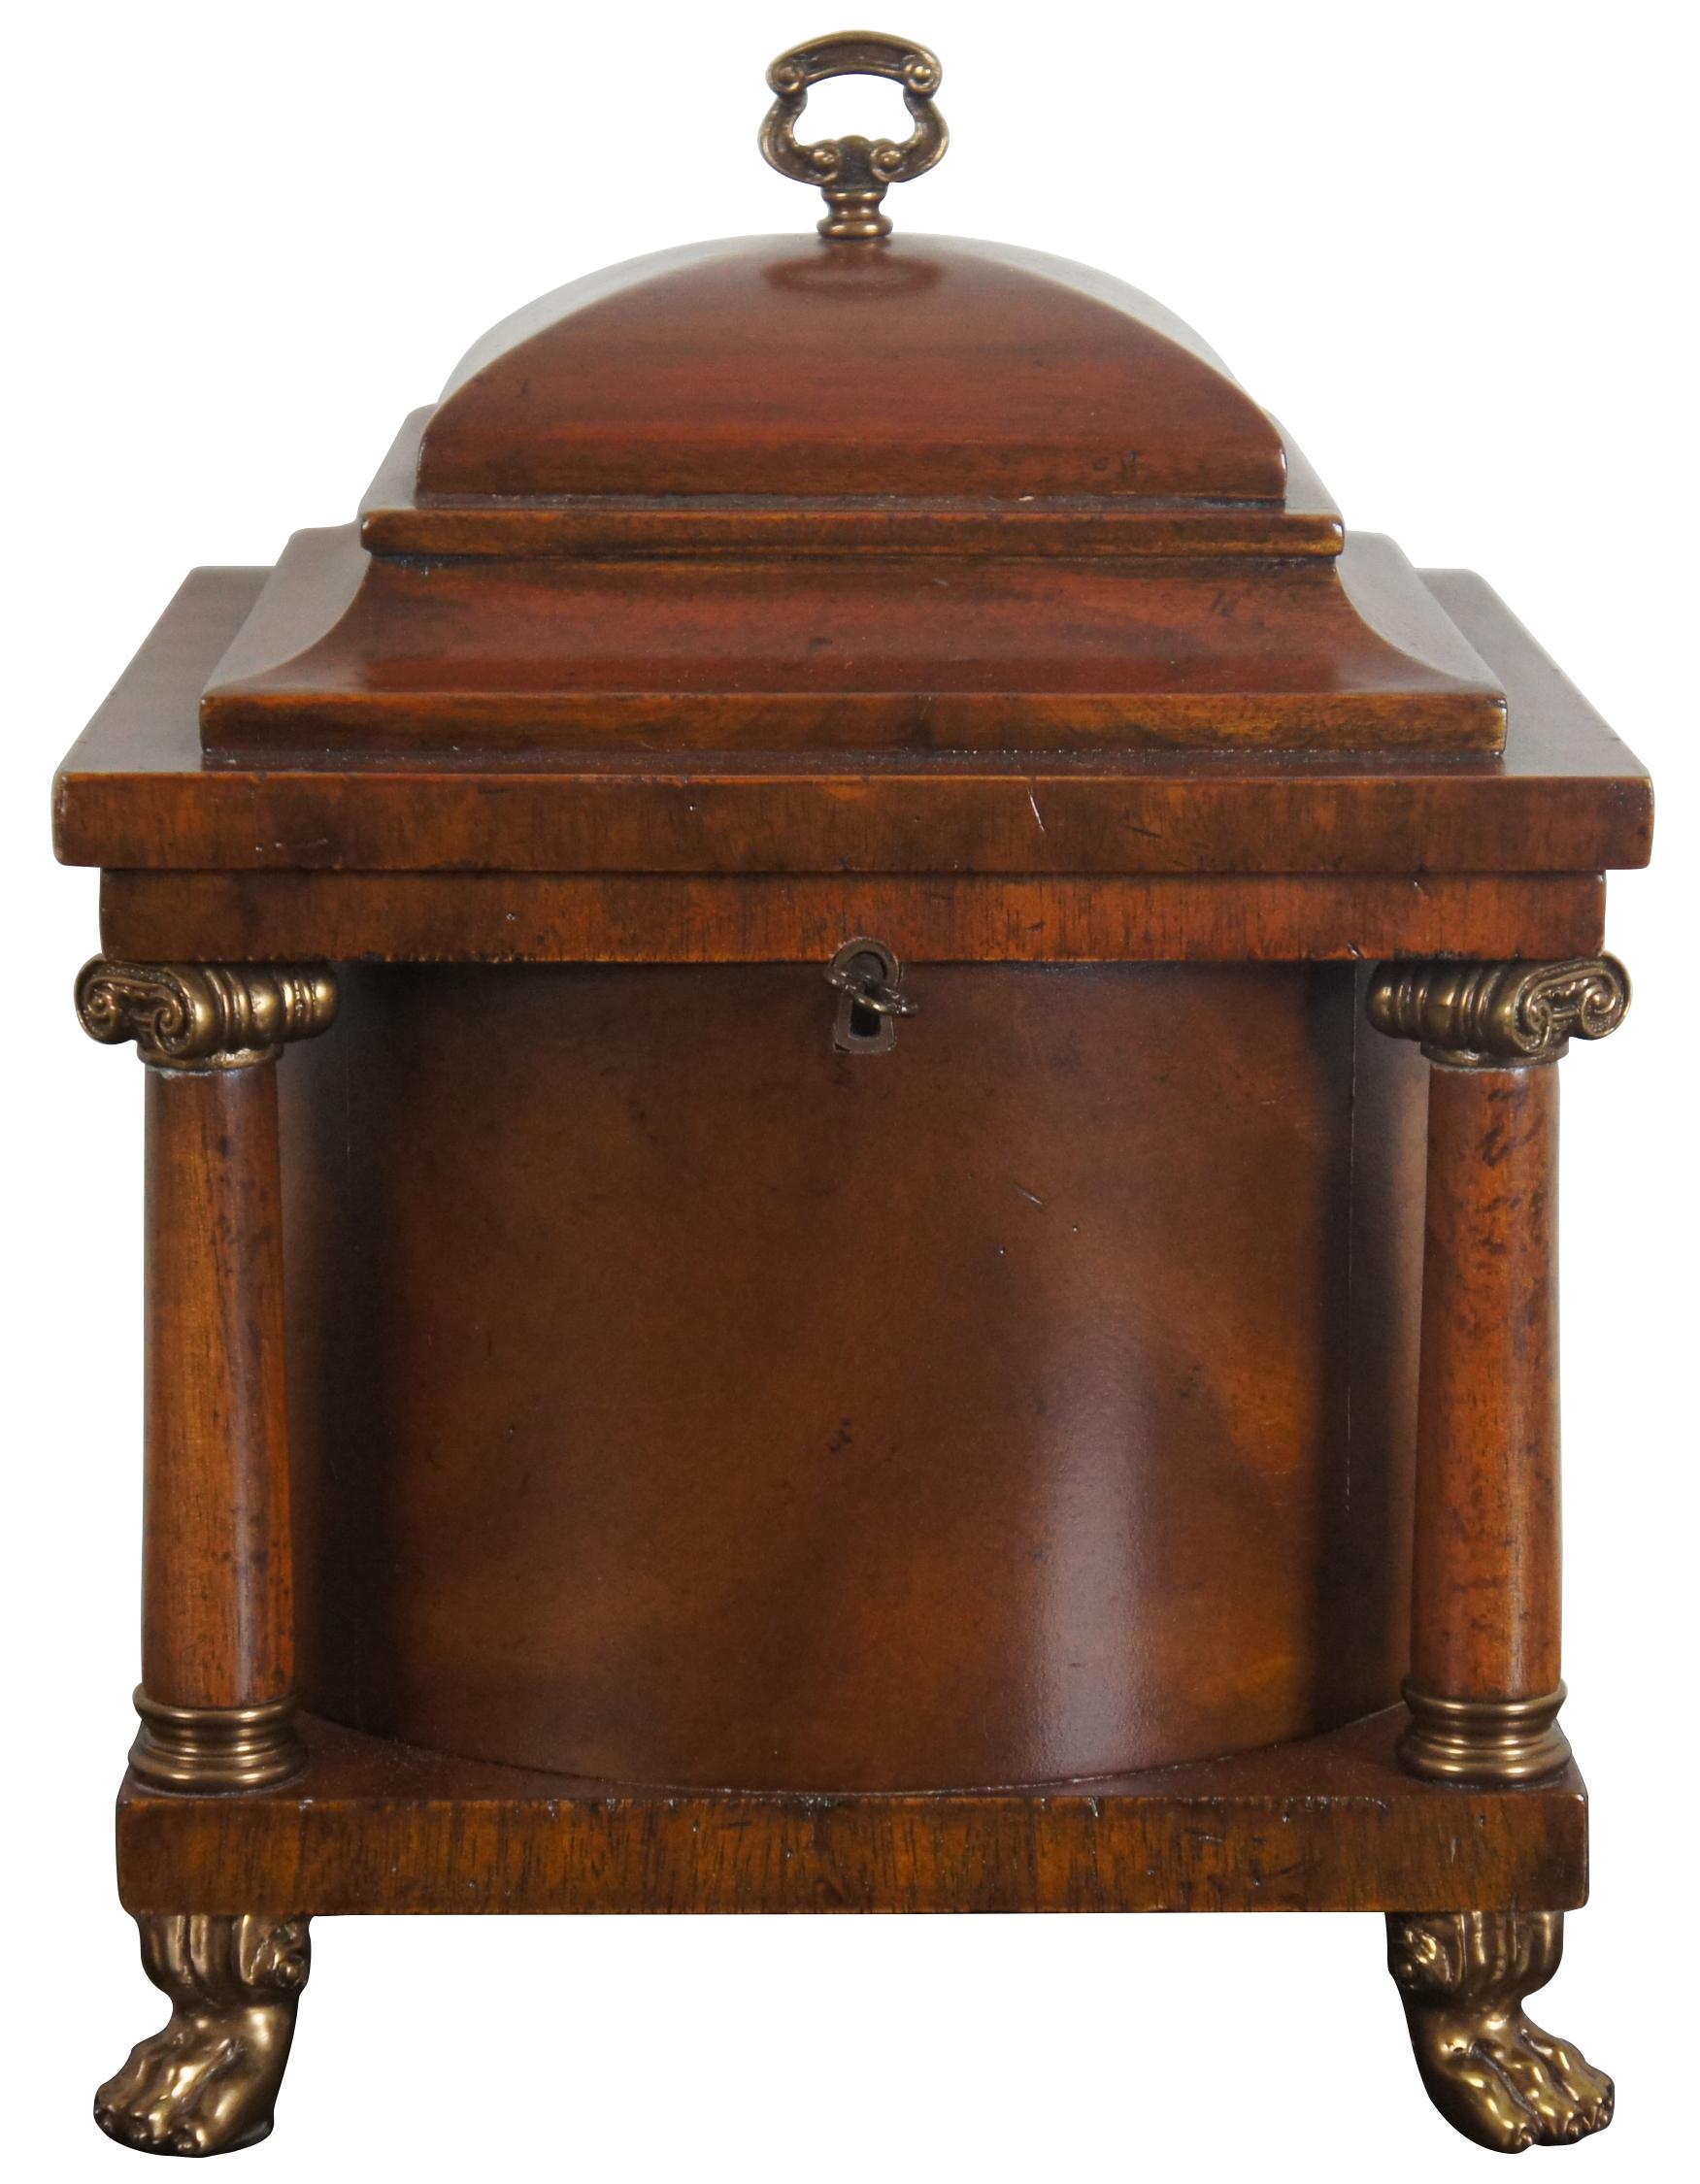 Rotunda shaped lidded box by Maitland Smith. Made from mahogany with brass mounts and paw feet. Features a cylindrical center supported by four columns. Great for use as a tea caddy, cigar humidor, jewelry chest or trinket storage box. Includes